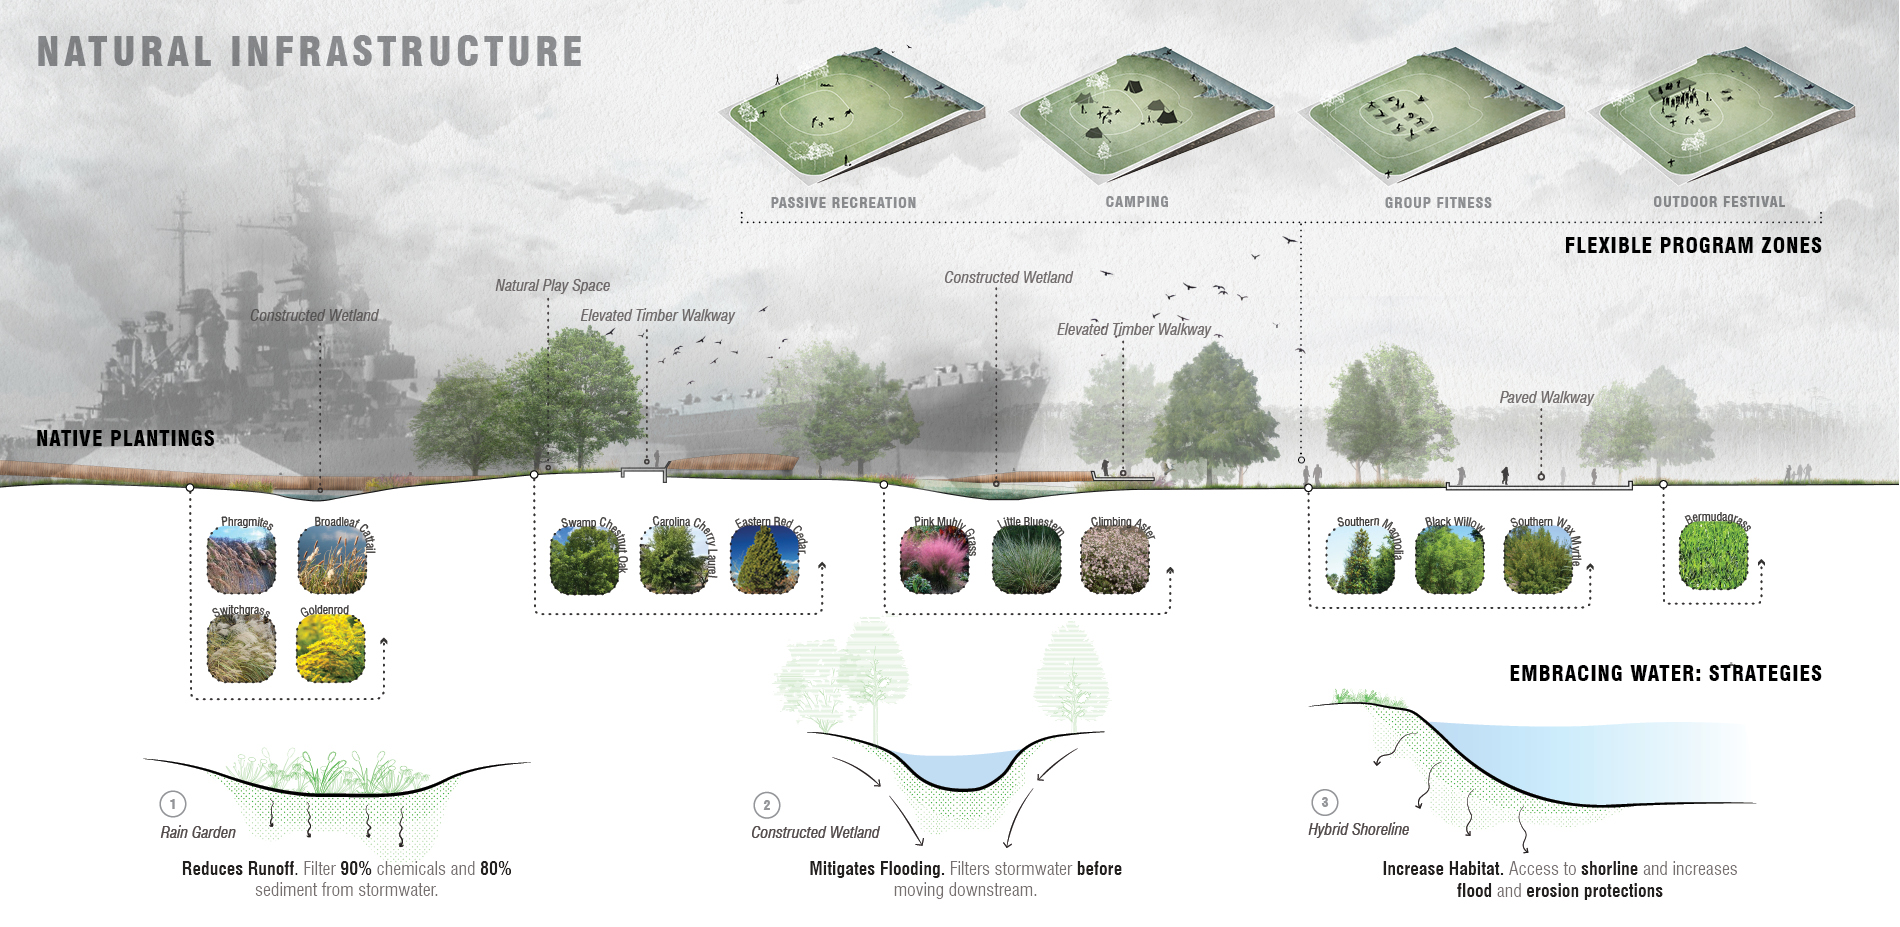 Natural Infrastructure: Focus on Nature-Based Solutions